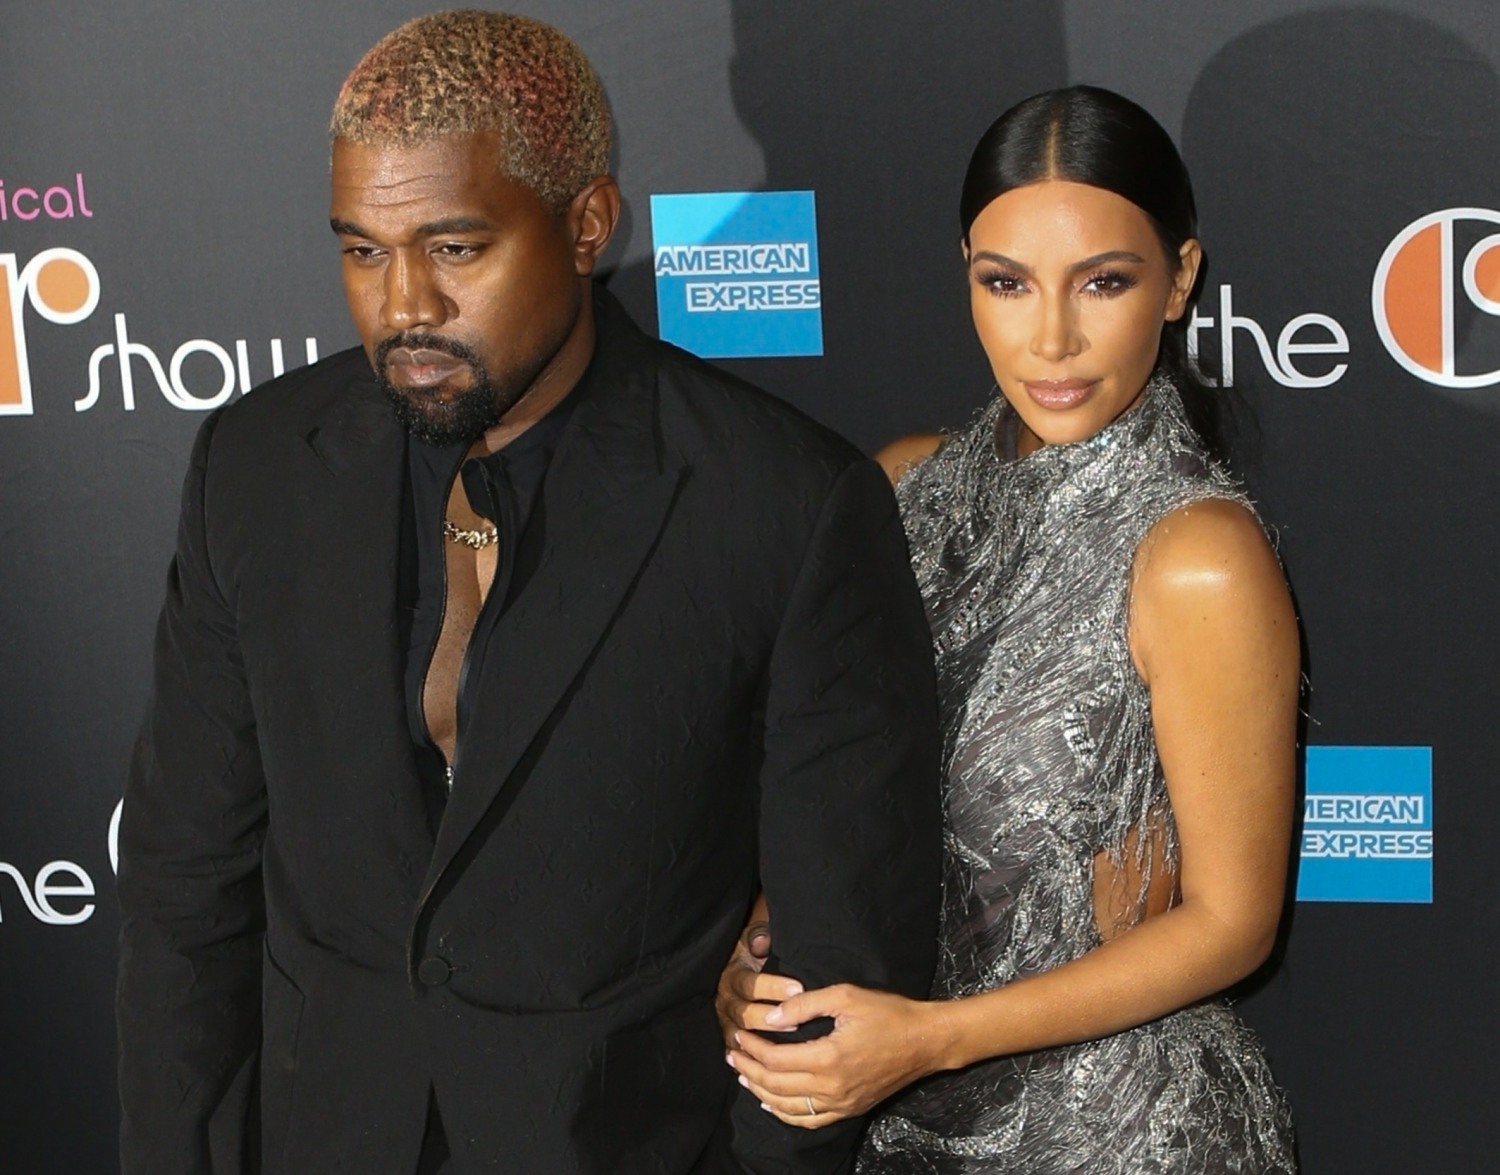 Kim Kardashian and Kanye West arrive on the black carpet at the Cher musical